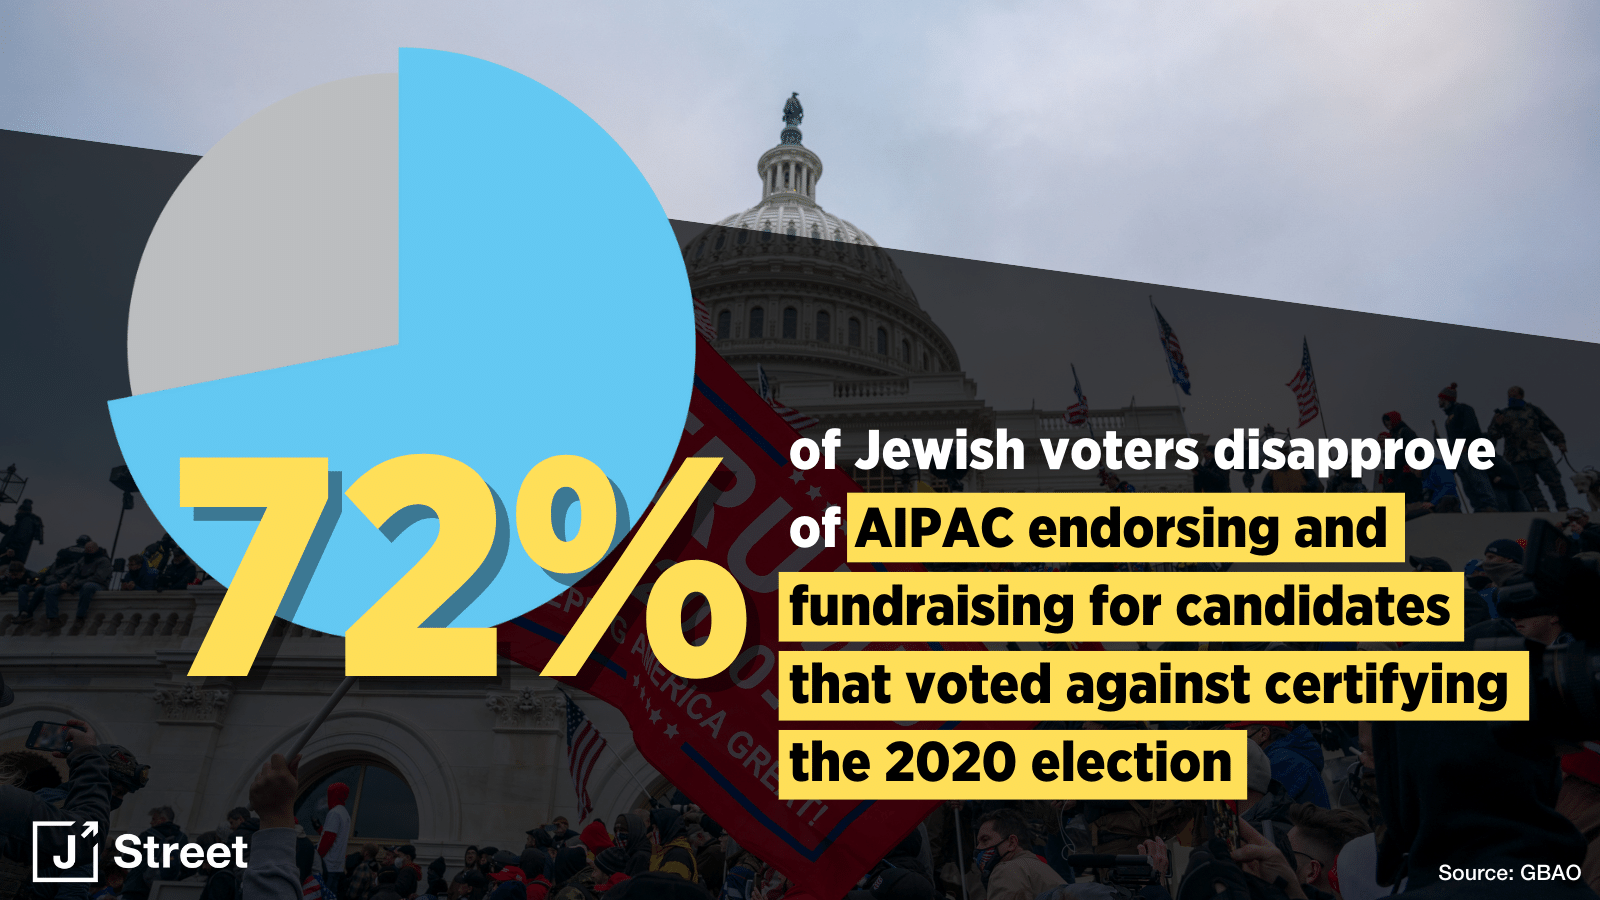 72% disapprove of AIPAC endorsing and fundraising for candidates that voted against certifying the 2020 election.